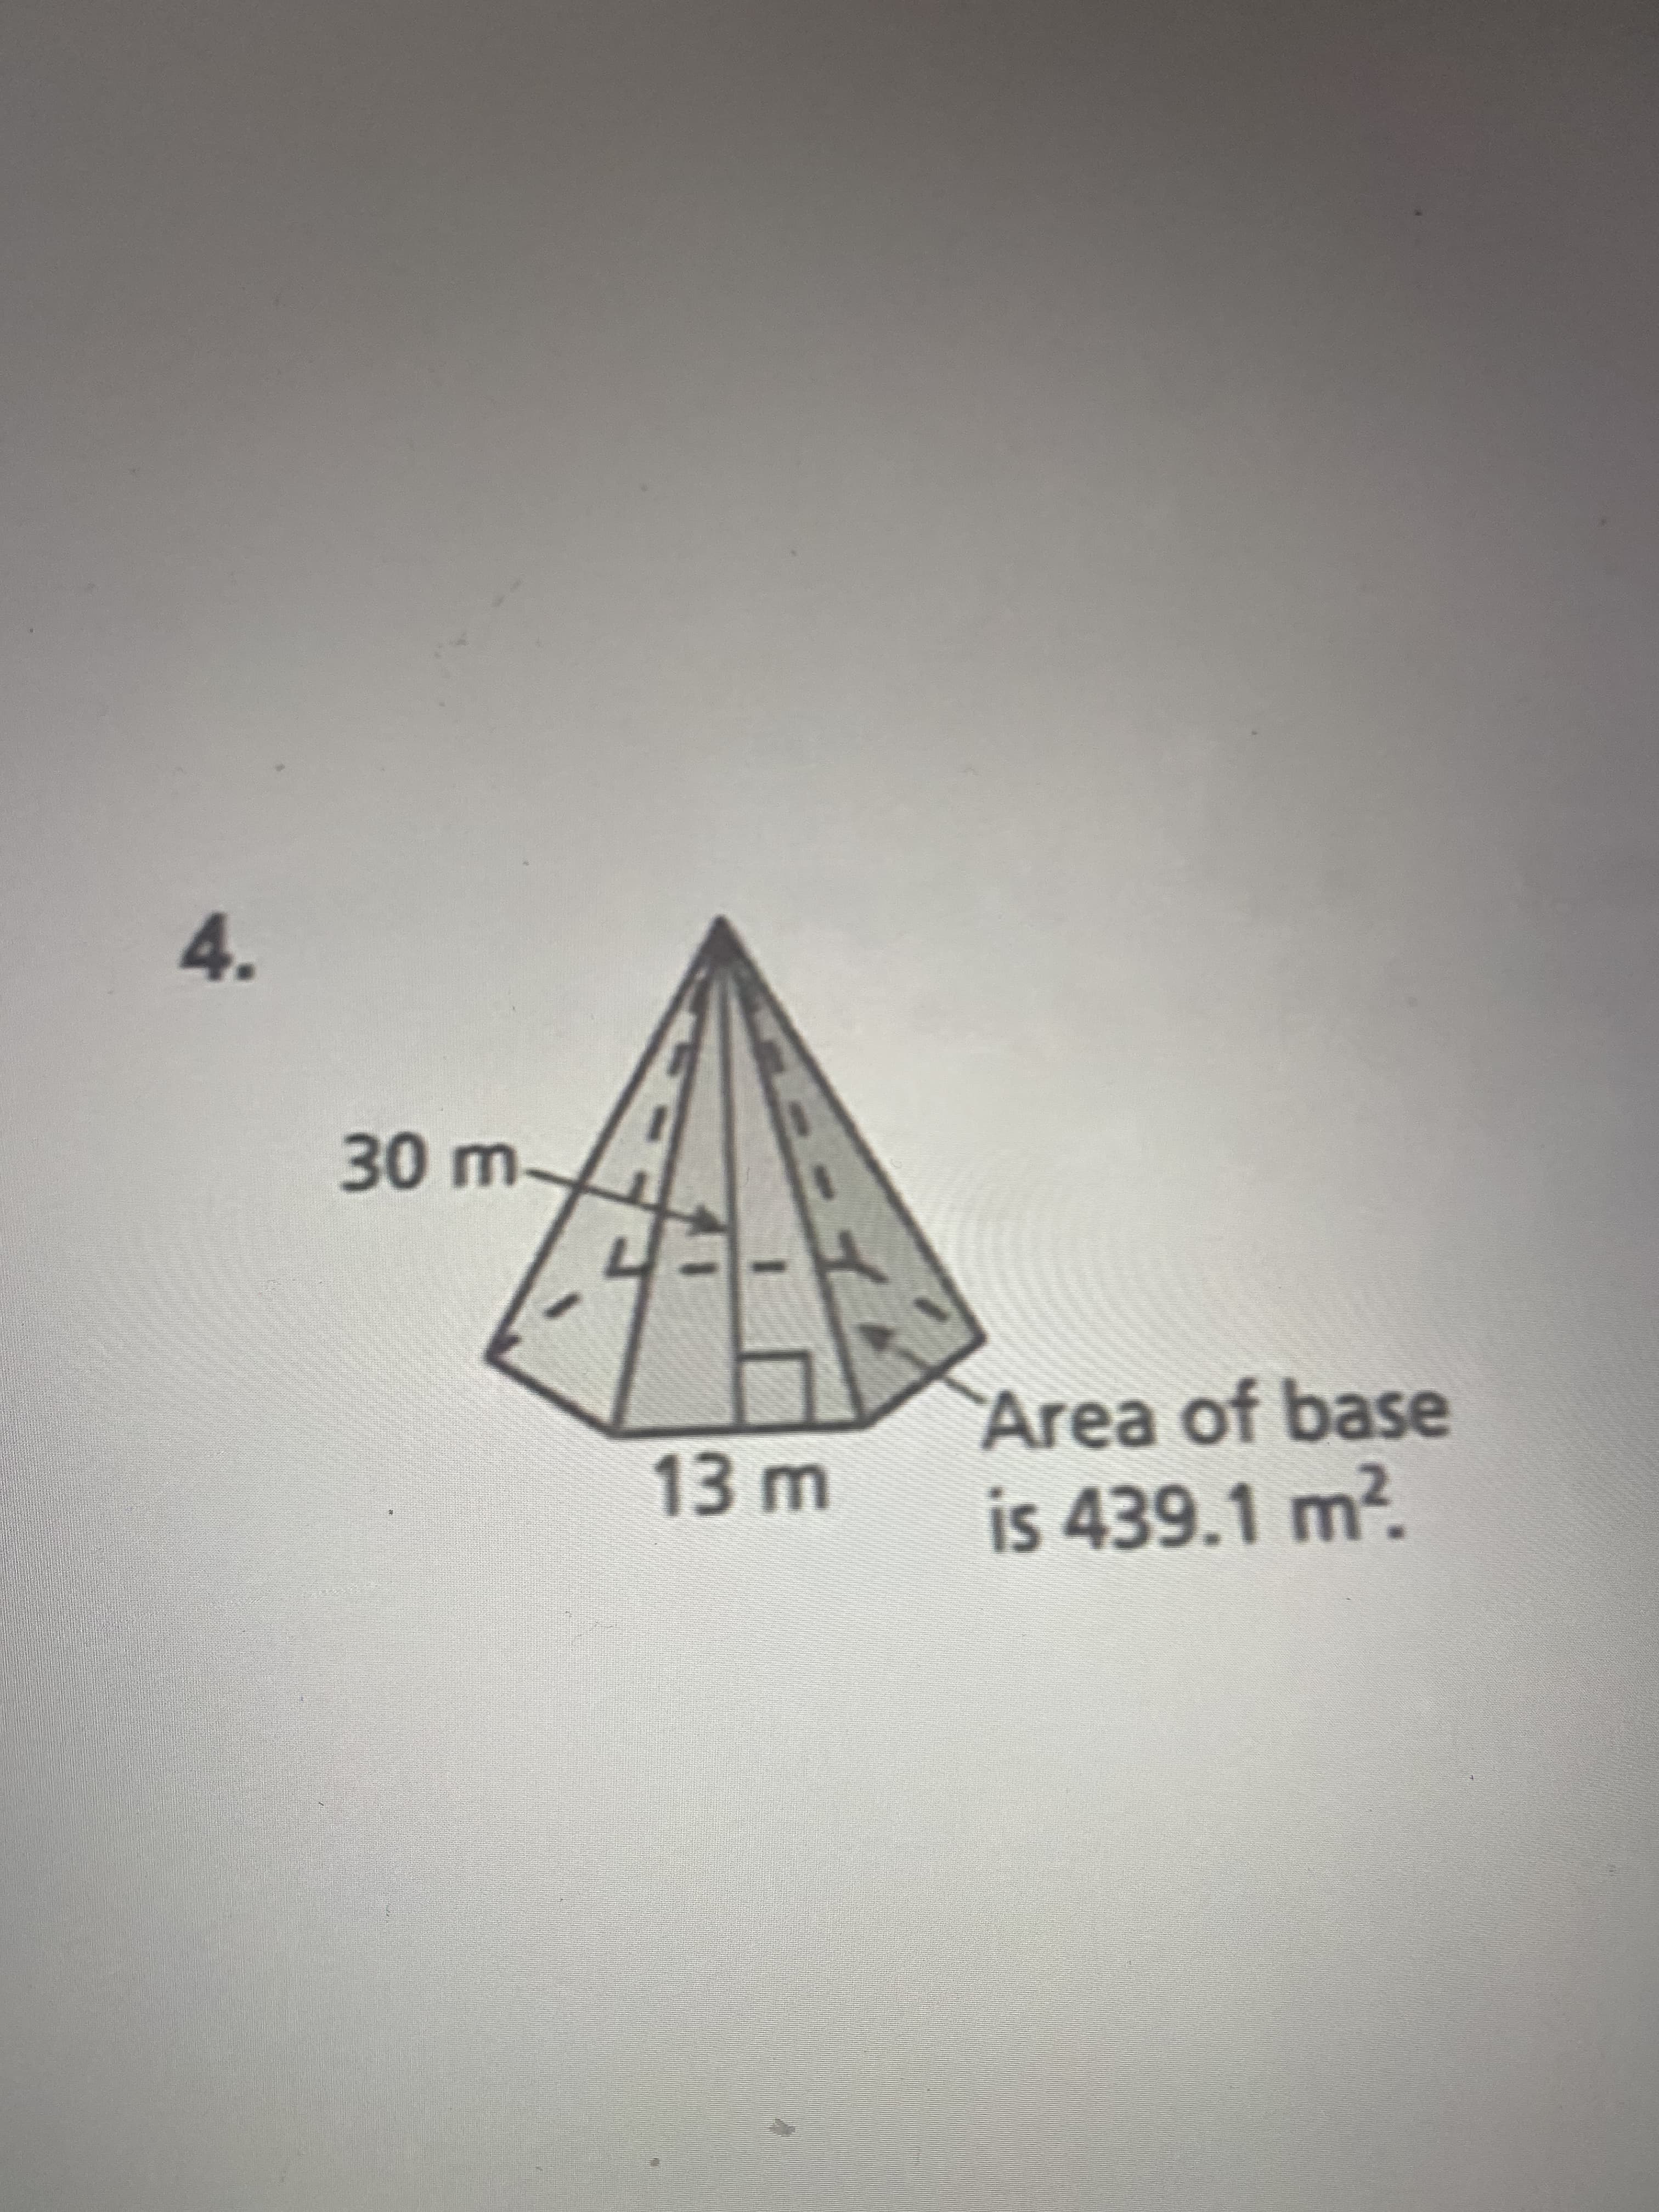 Area of base
is 439.1 m?.
